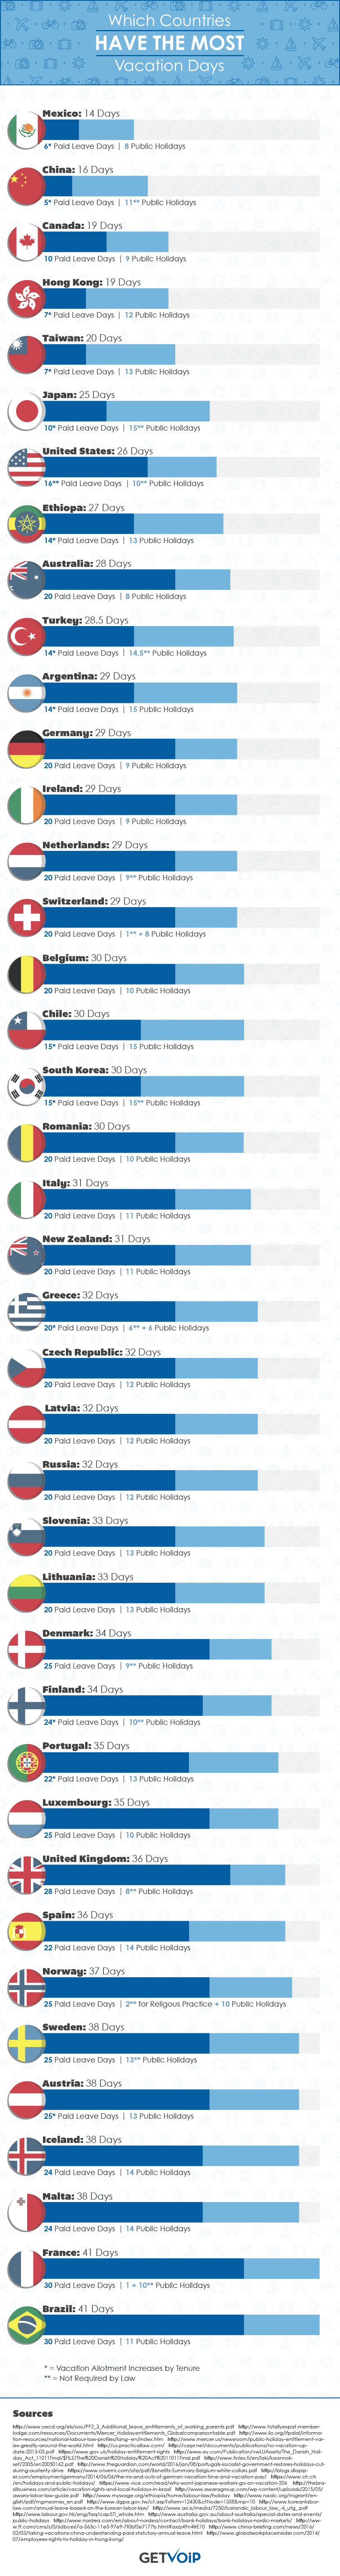 Countries with most vacation days Infographic